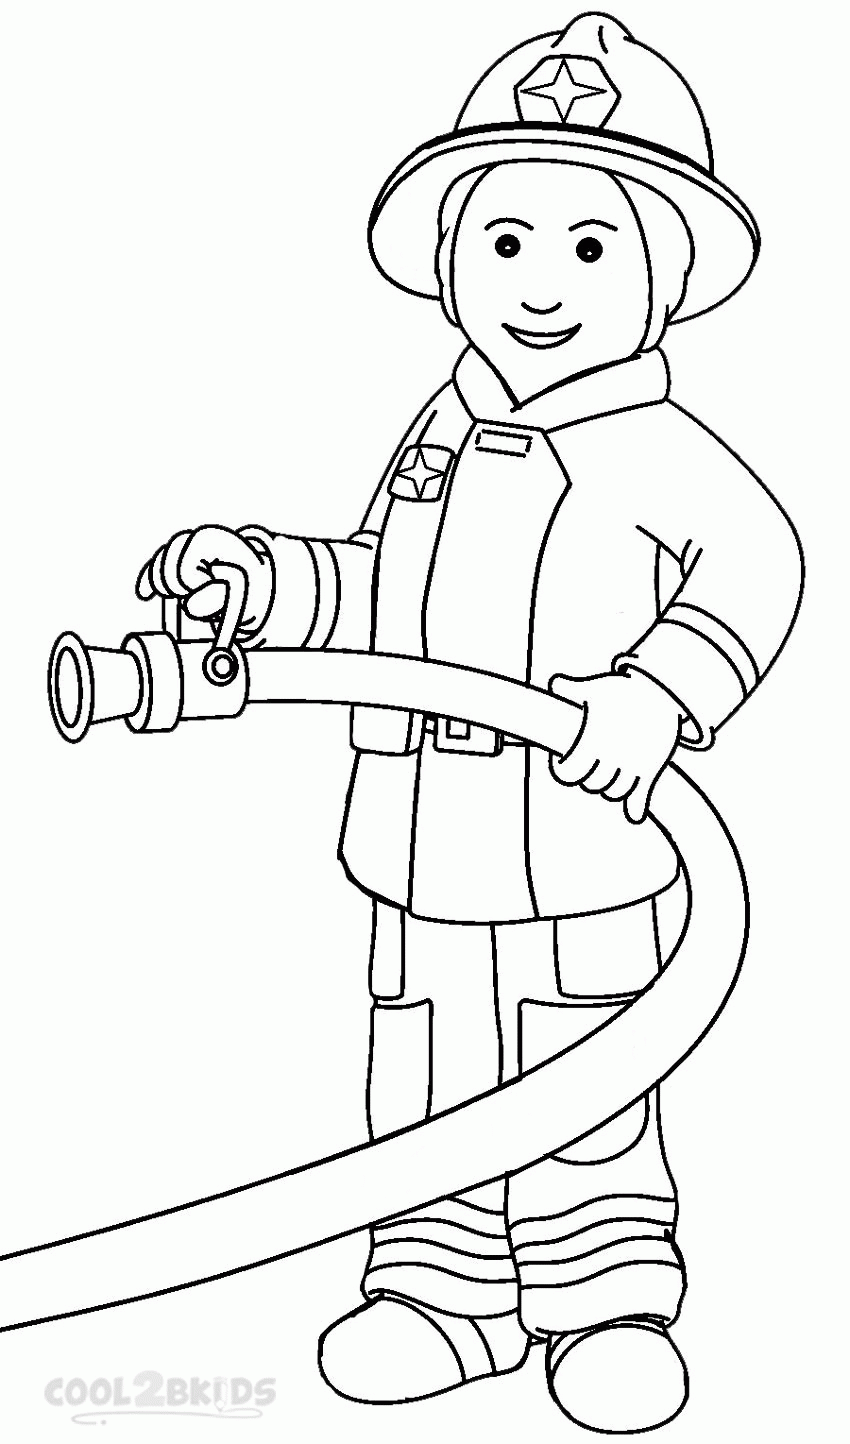 8 Pics of Firemen Coloring Pages - Printable Fireman Coloring ...